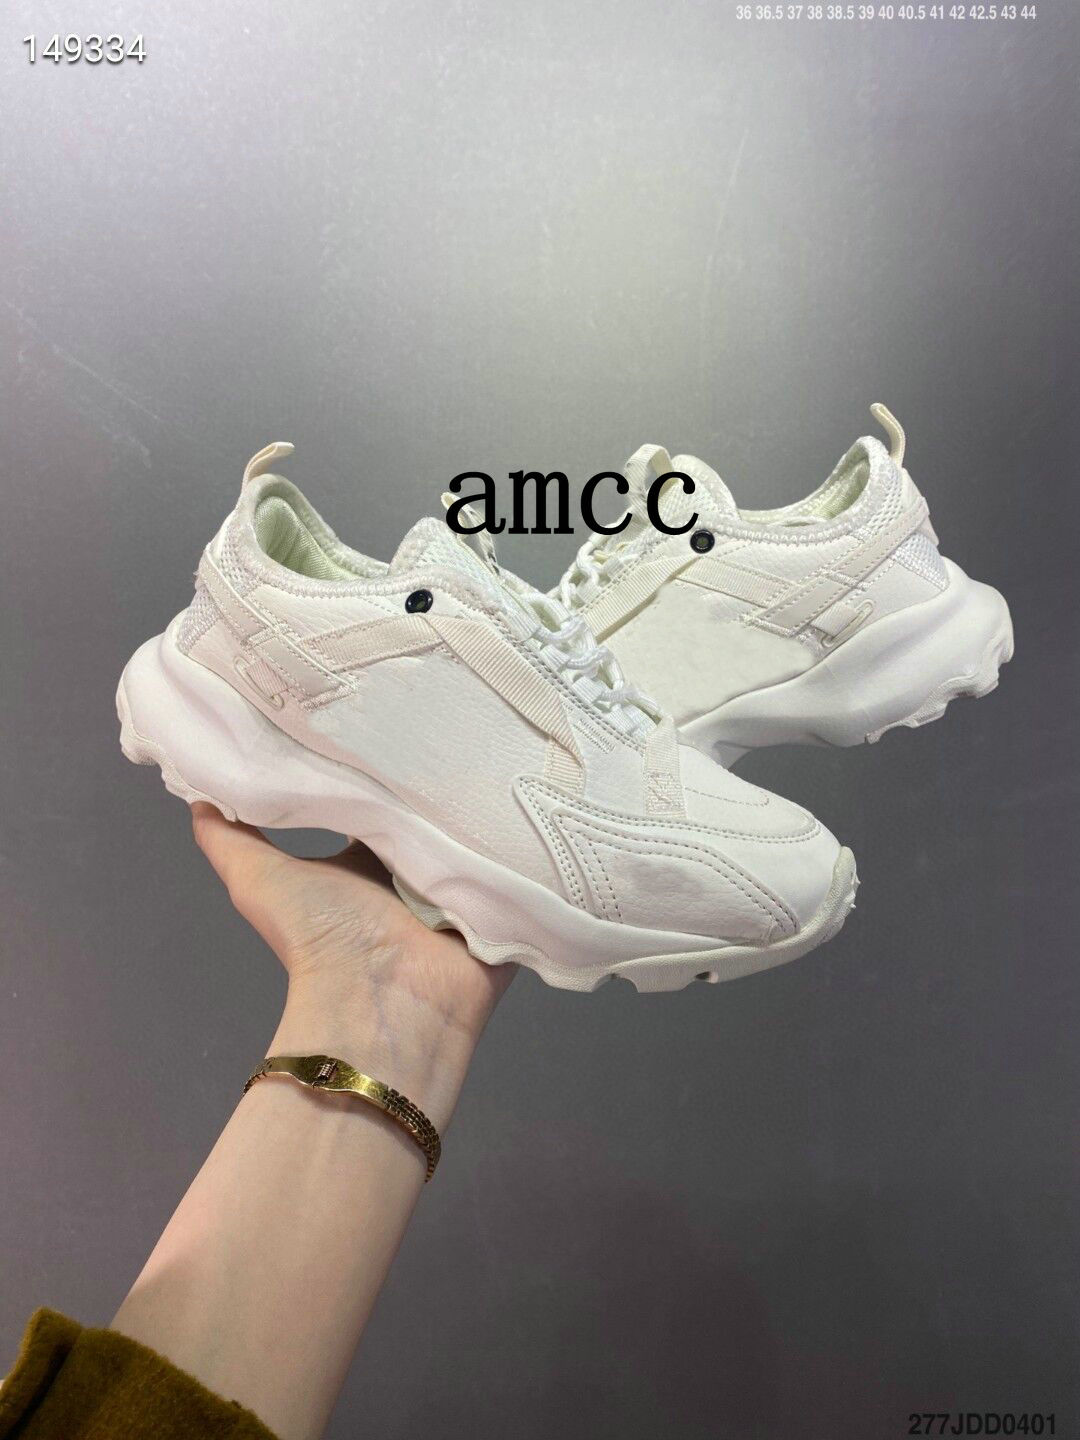 

2022 new TC 7900 Casual Shoes for Men Running Shoes Mens Sneakers Women Sneaker Womens Trainers Athletic Chaussures Sail Sport shoe Athletics Trainer Jogging